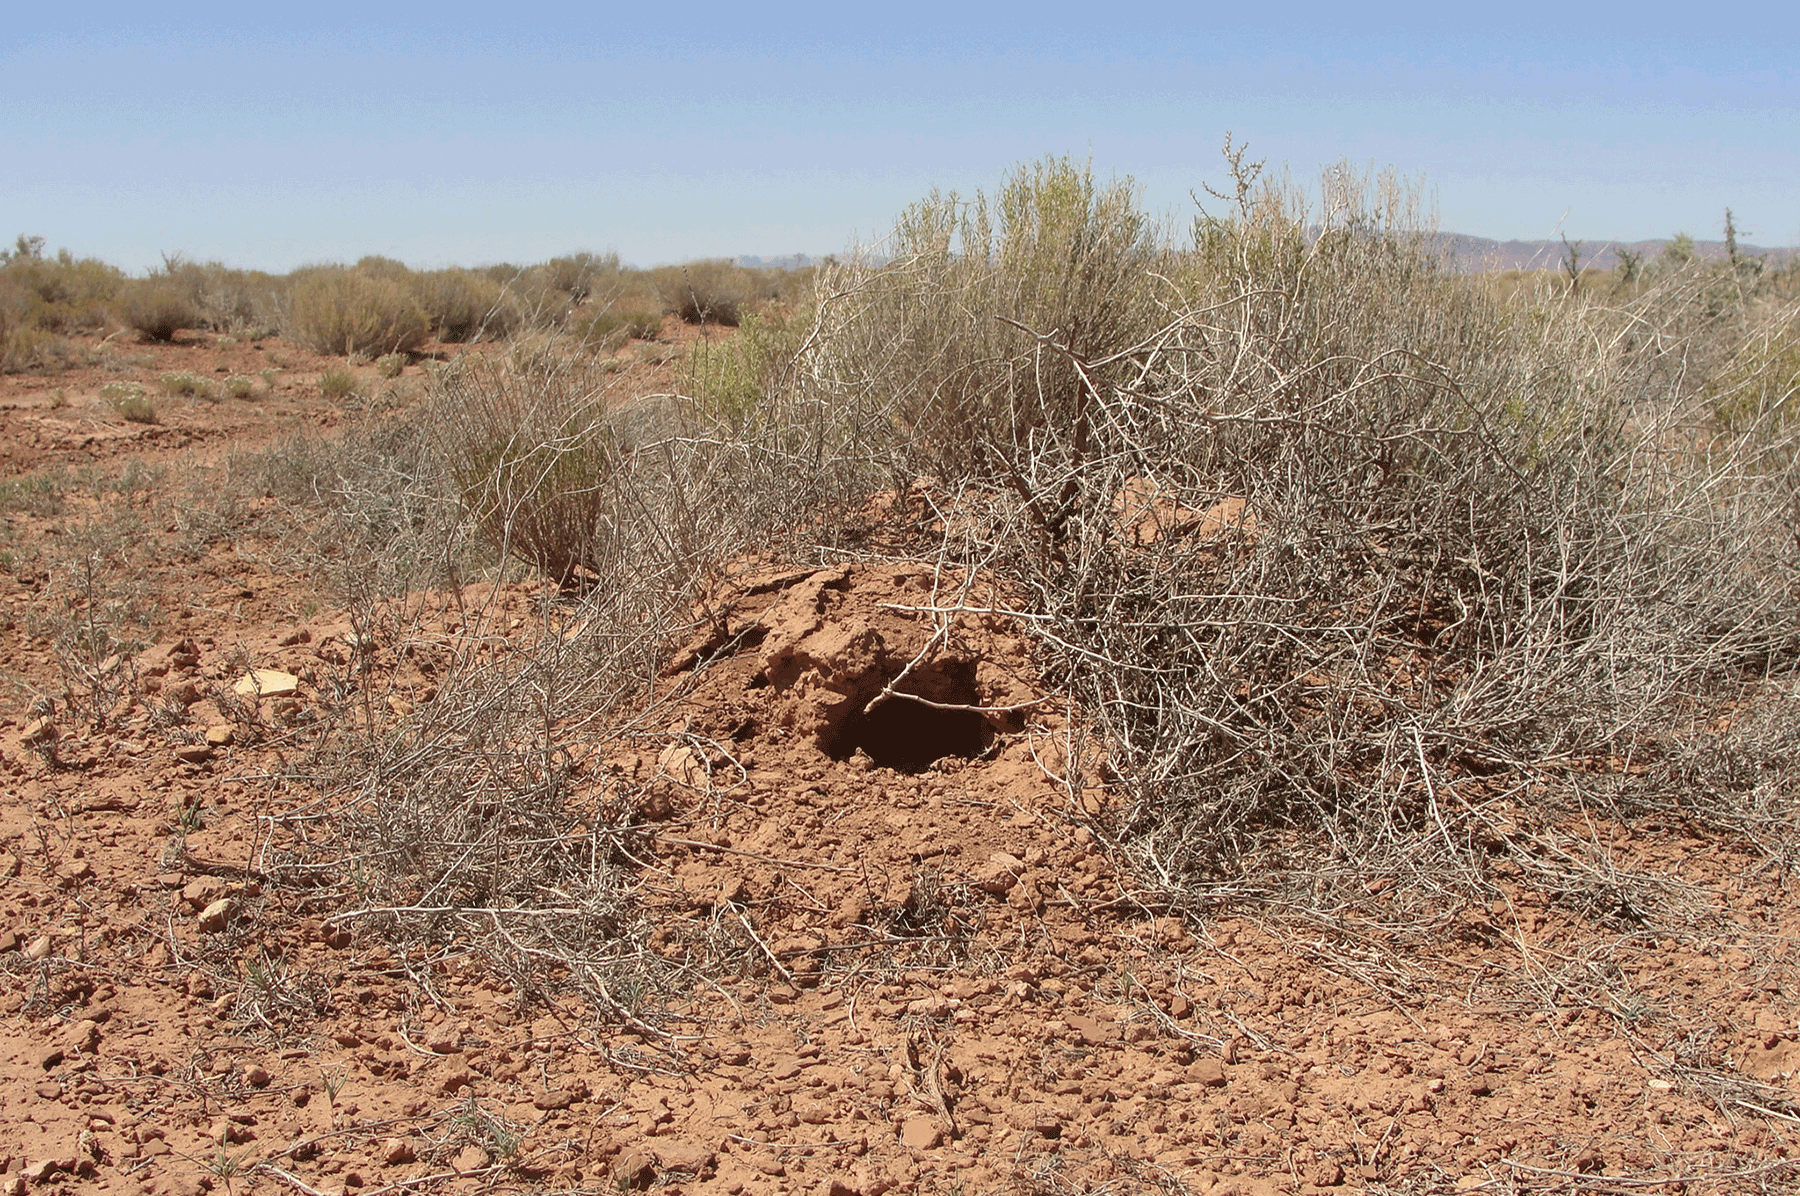 Burrow in mound